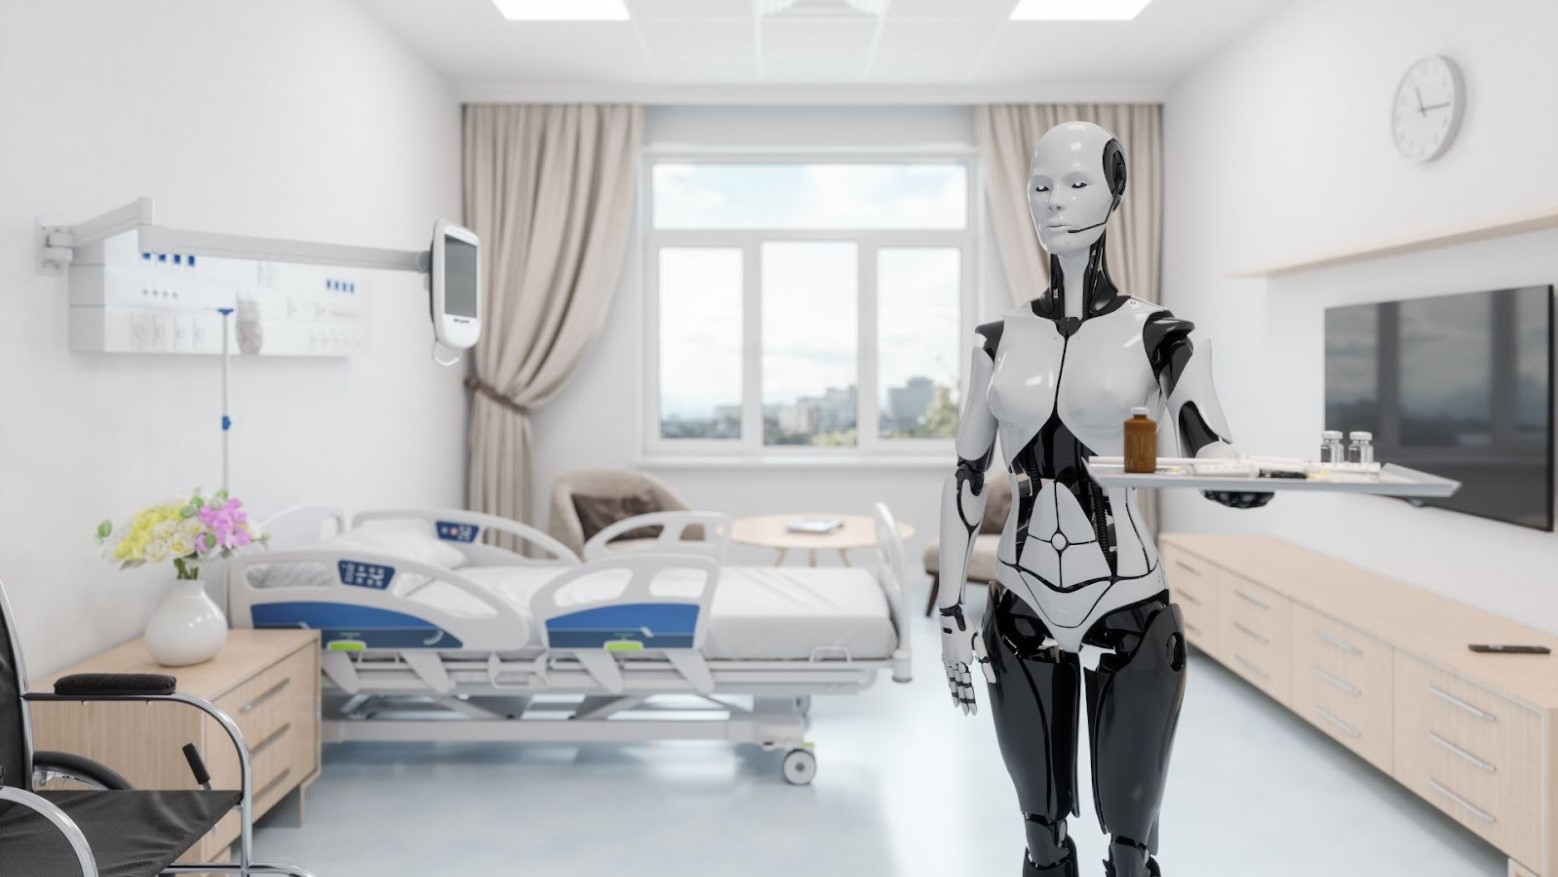 A robotic nurse stands holding a food tray in an empty patient room.